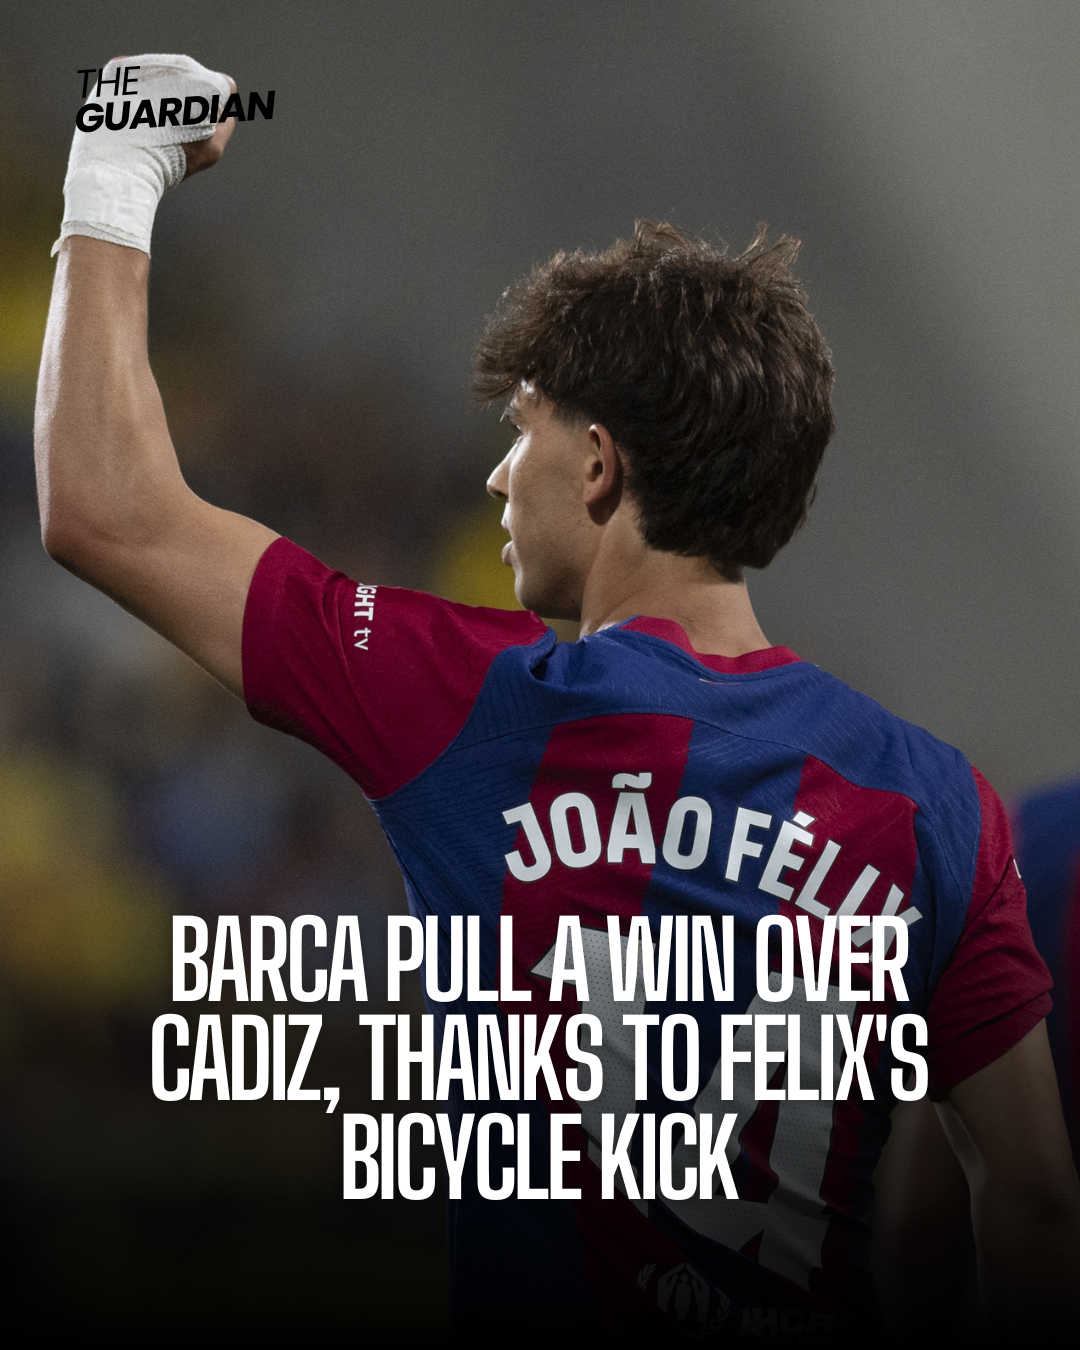 Joao Felix banged a superb bicycle kick as a much-changed Barcelona team fought to win over Cadiz, which is relegation-threatened in La Liga.